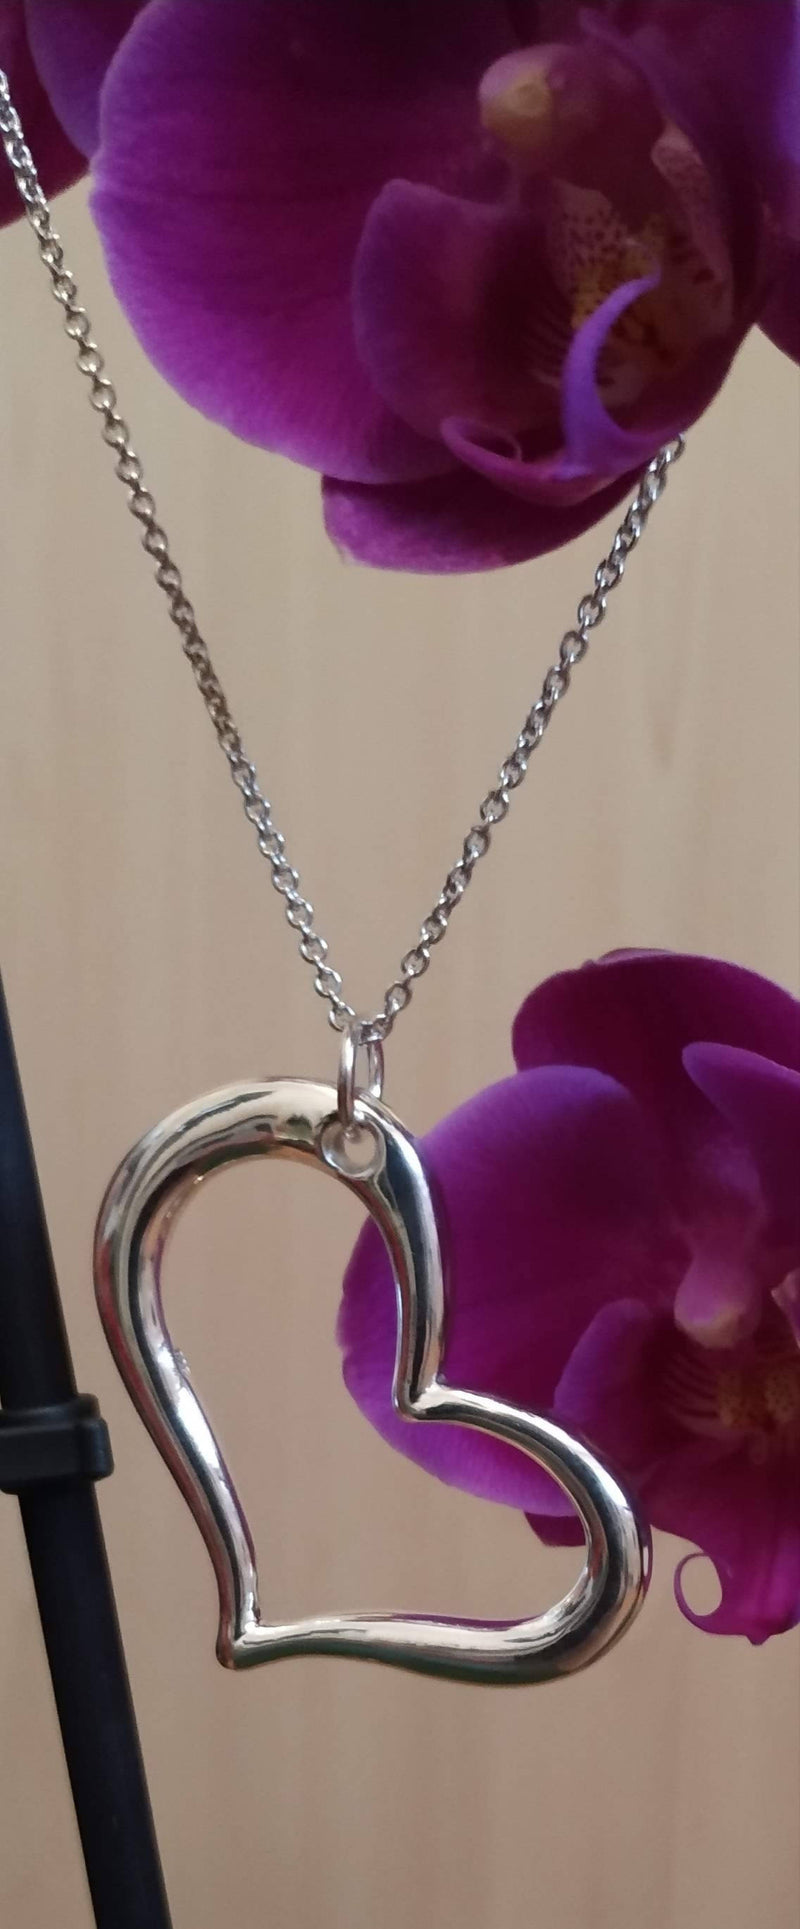 NEW STERLING SILVER HEART NECKLACE - 20"